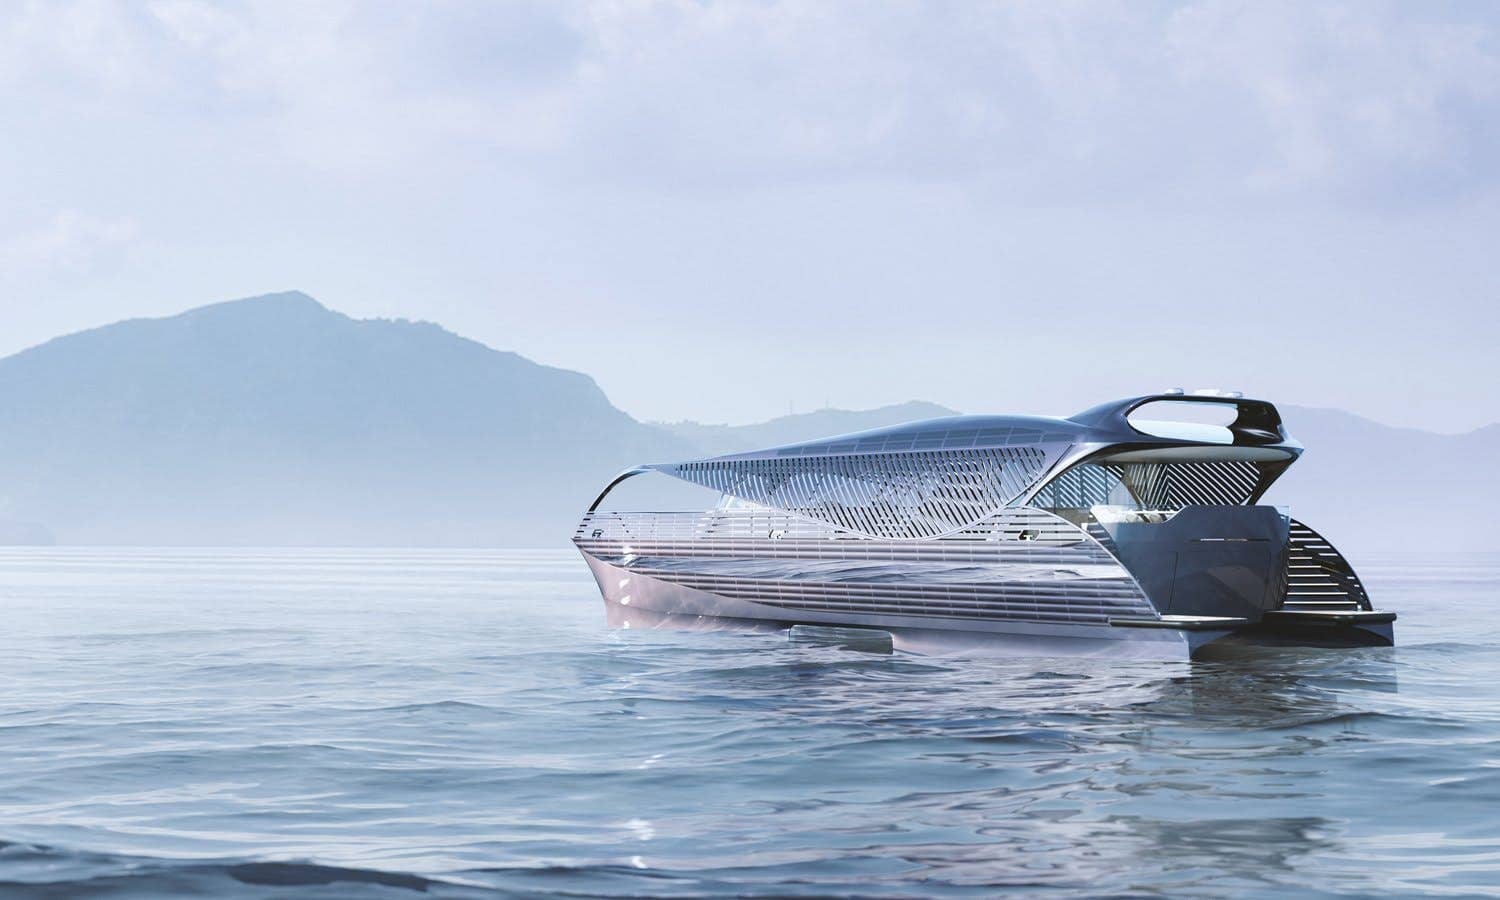 SolarImpact Yacht Can Cruise Indefinitely At A Speed Of 5 Knots